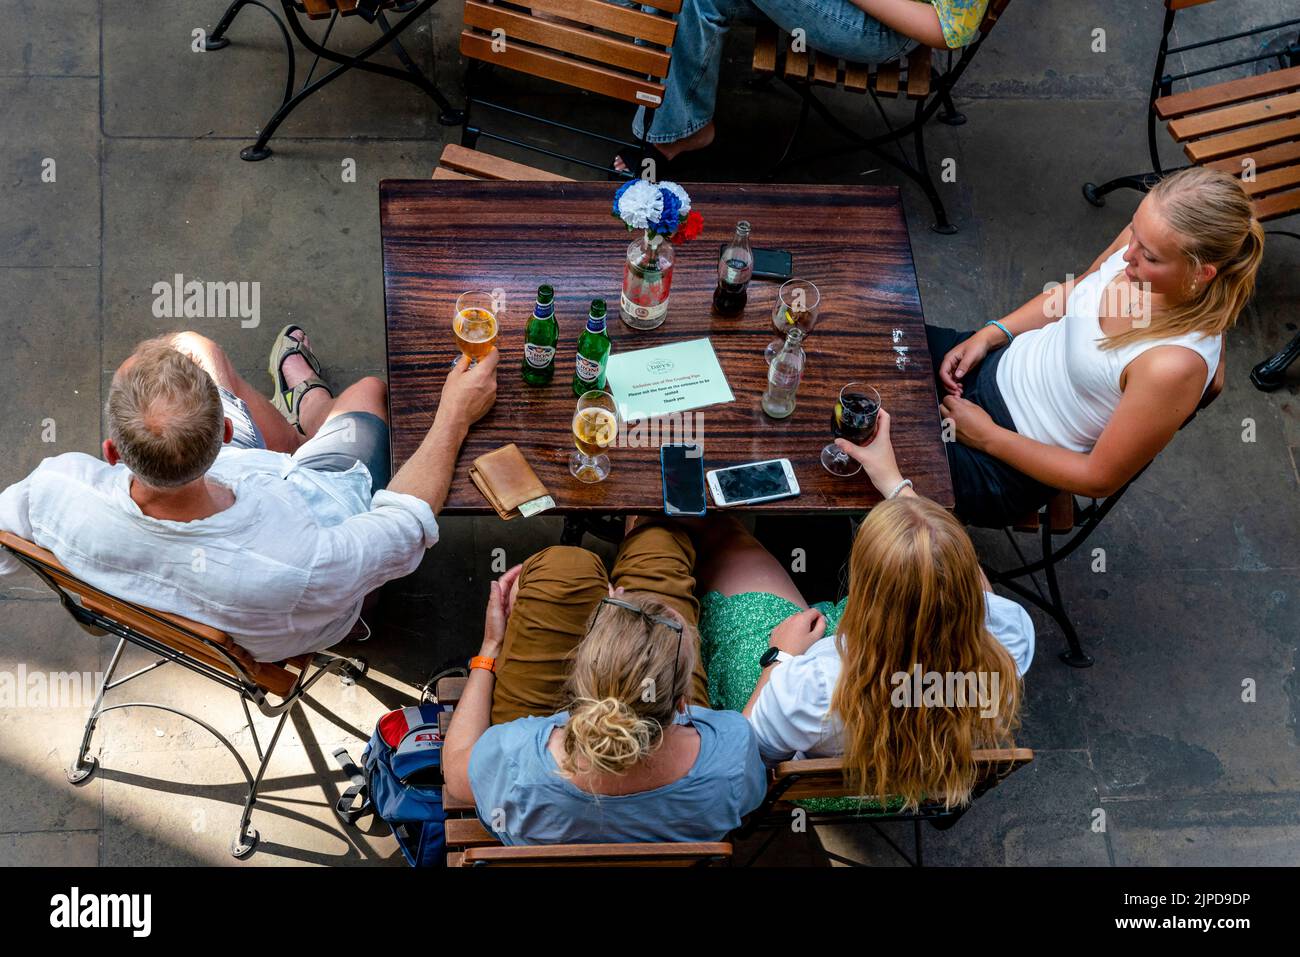 People Sitting Down At A Cafe/Restaurant In The Piazza In Covent Garden, London, UK Stock Photo